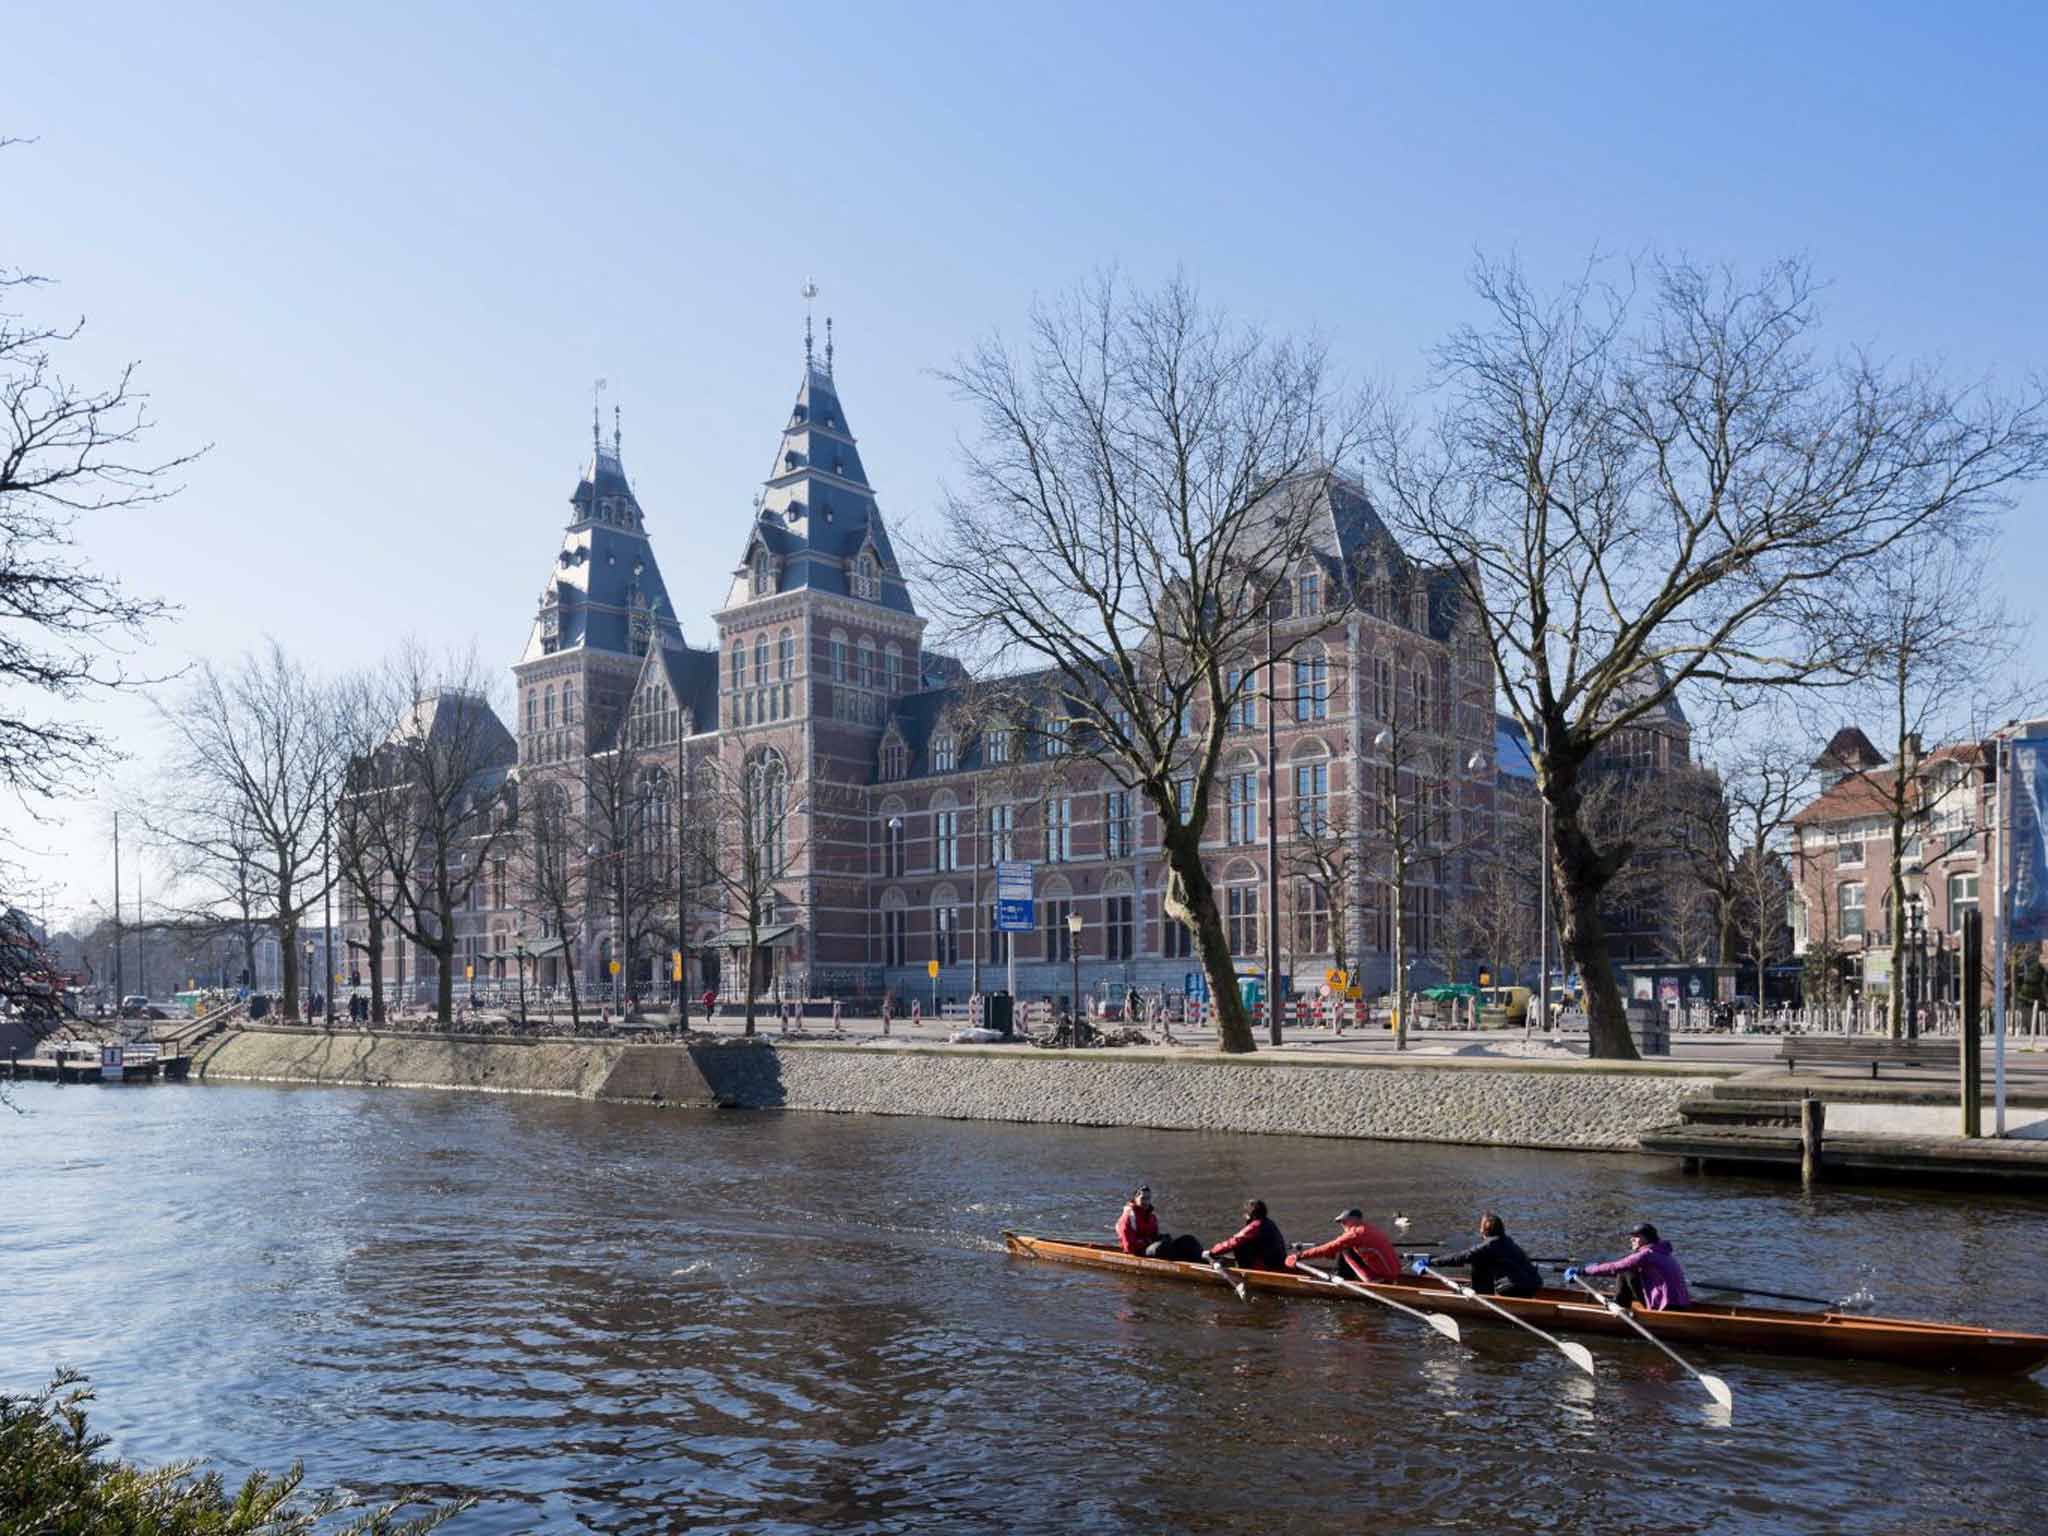 The best way to revive yourself after the long overnight flight is a coffee at the Café Papeneiland, 10 minutes' walk from Amsterdam Centraal station, followed by a visit to the superbly refreshed Rijksmuseum